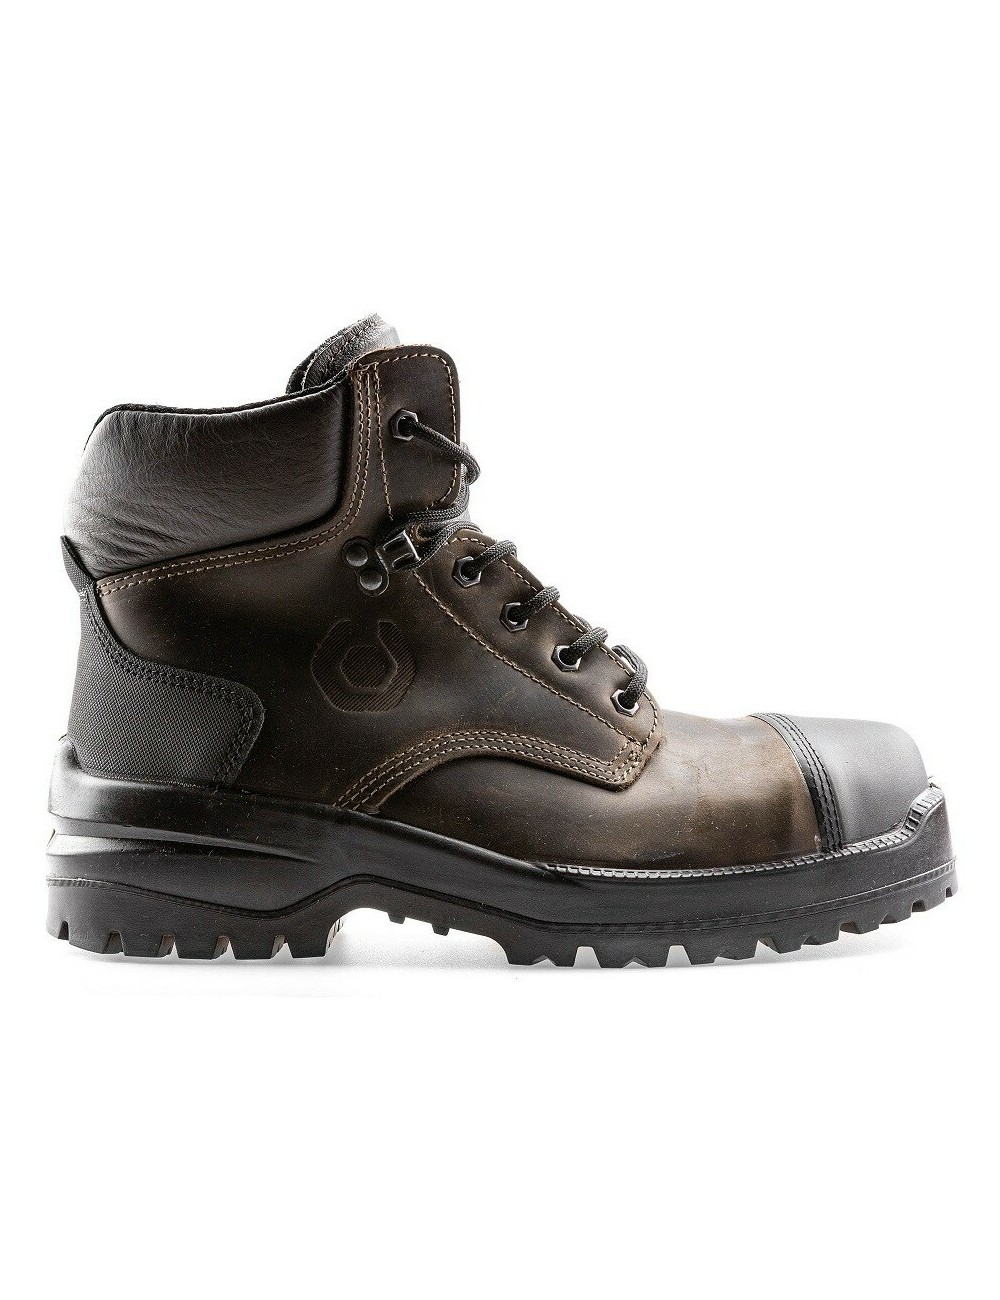 BASE BISON TOP S3 SRC work ankle boots